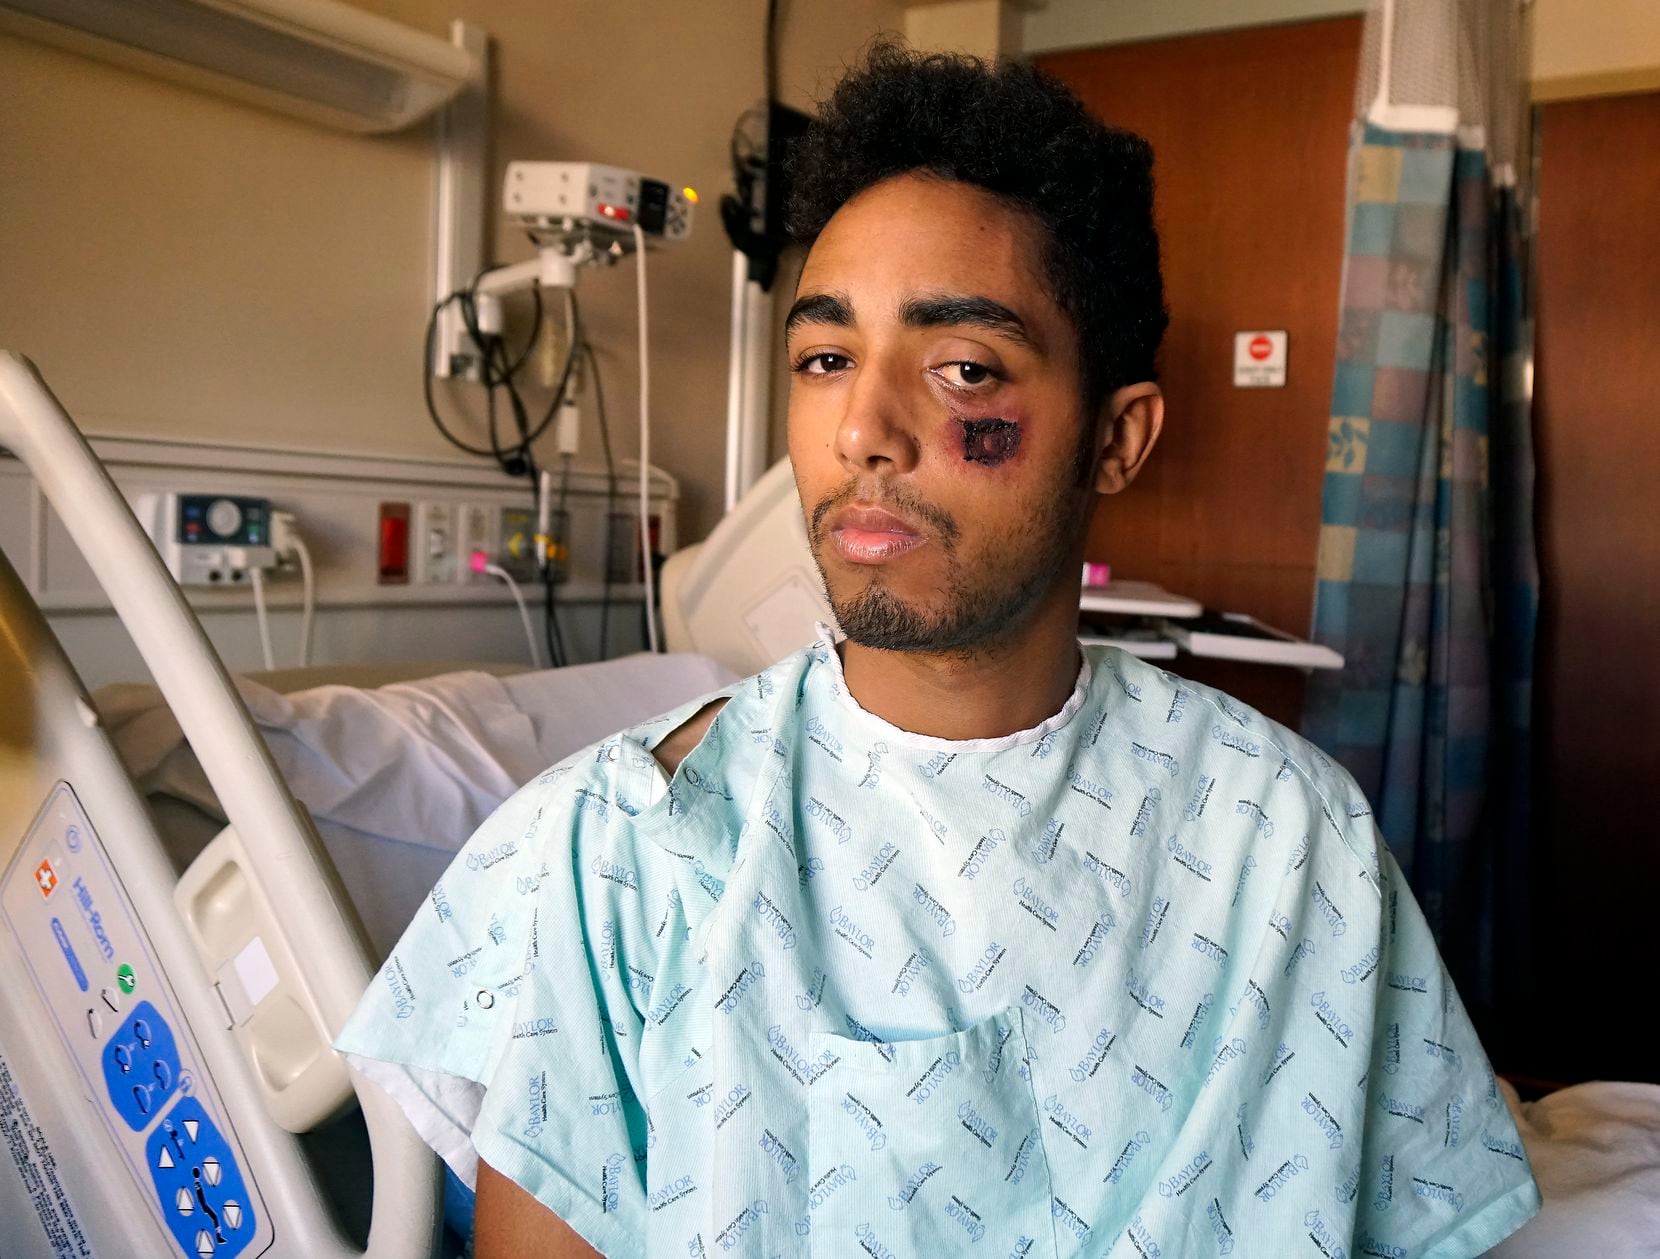 Vincent Doyle was struck by a so-called less lethal bullet during a protest in downtown Dallas.